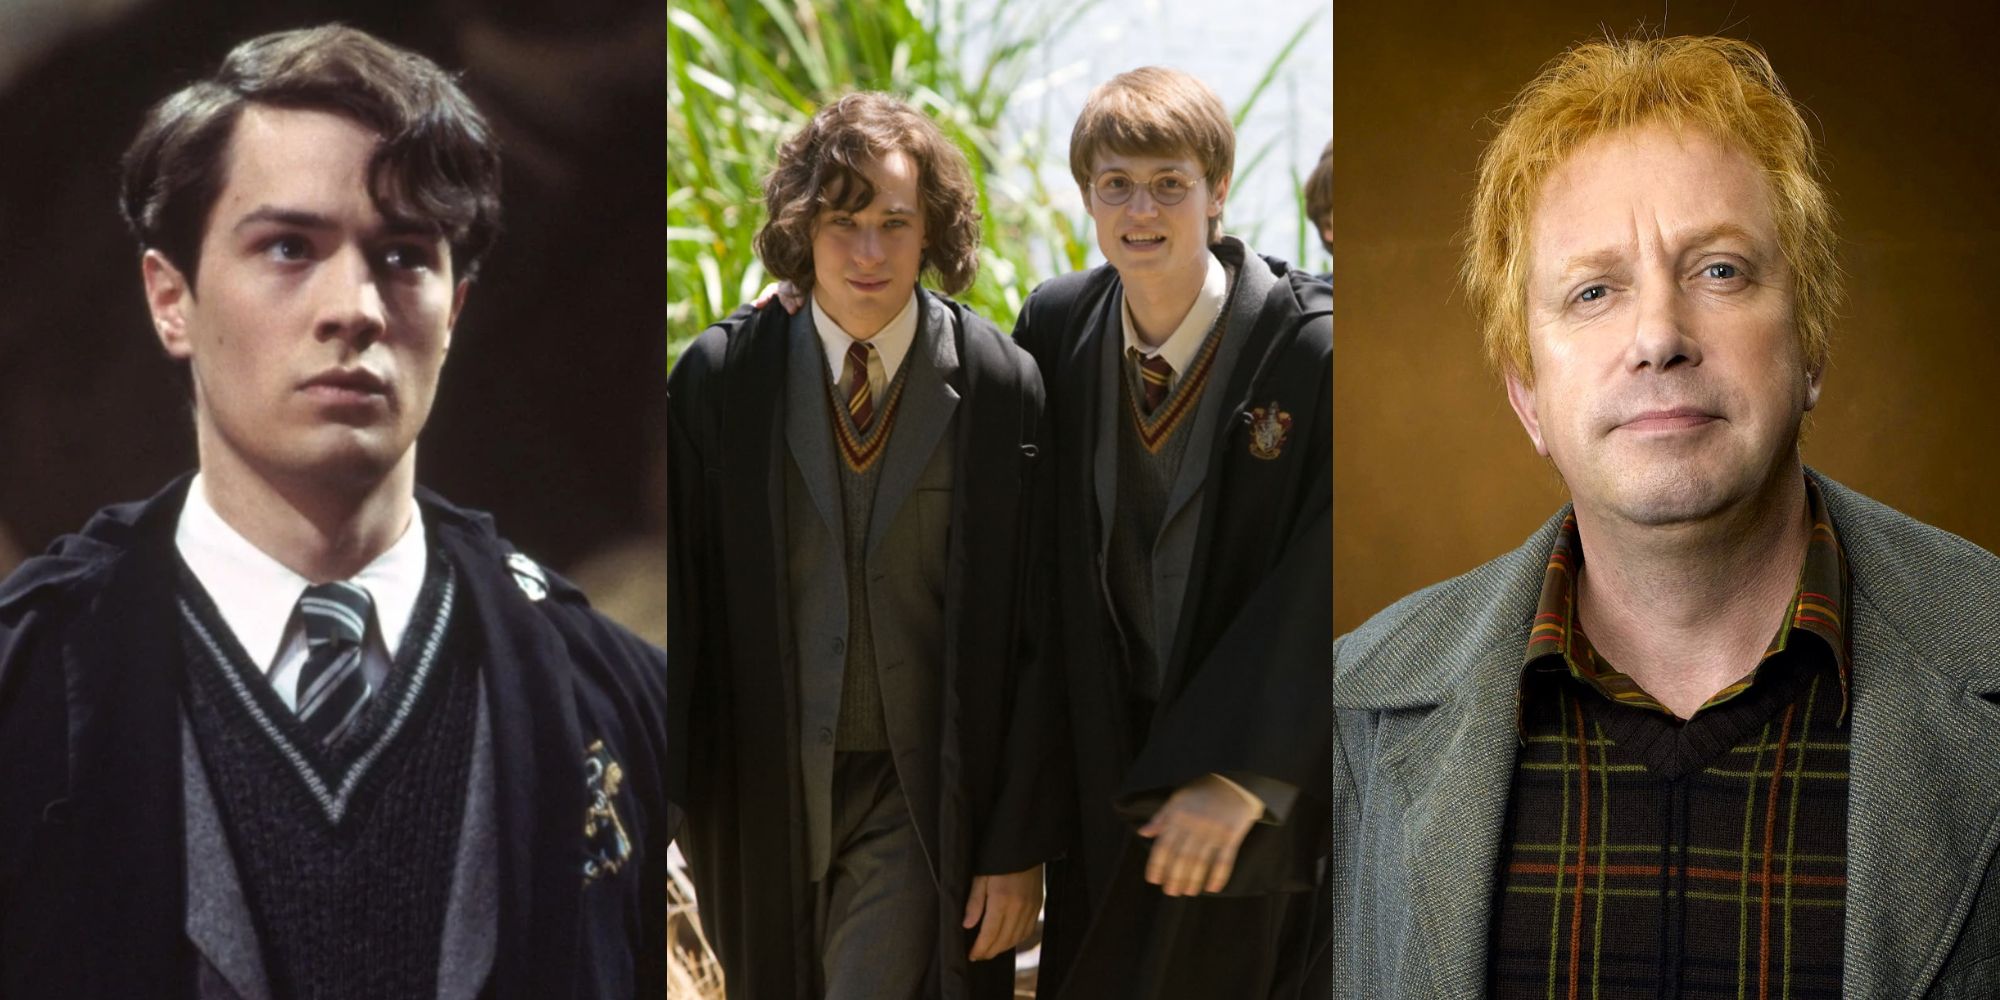 10 Ideas For A Harry Potter TV Show, According To Reddit